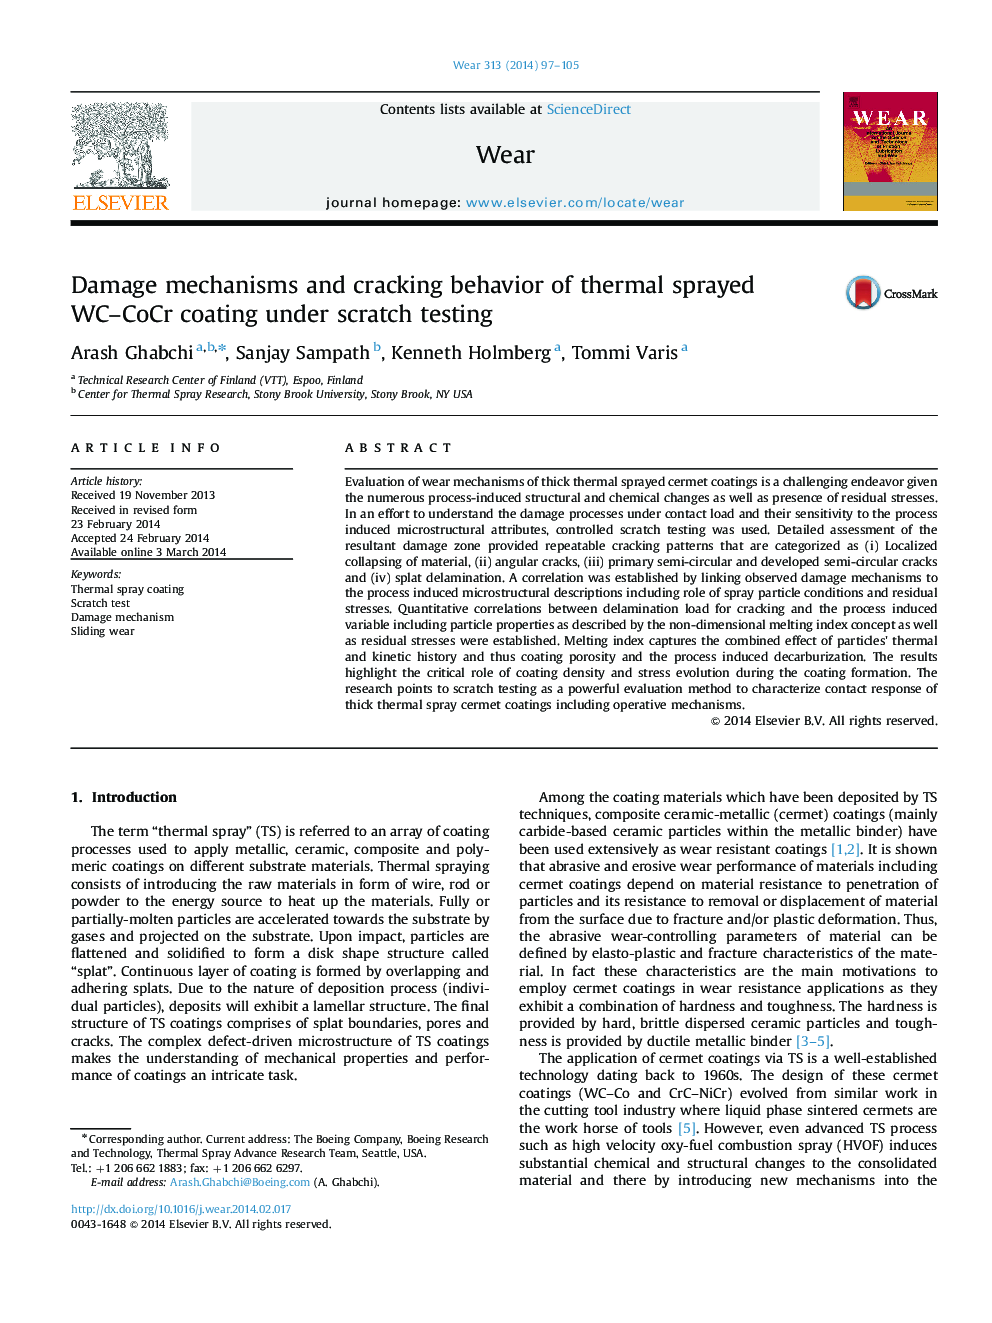 Damage mechanisms and cracking behavior of thermal sprayed WC-CoCr coating under scratch testing